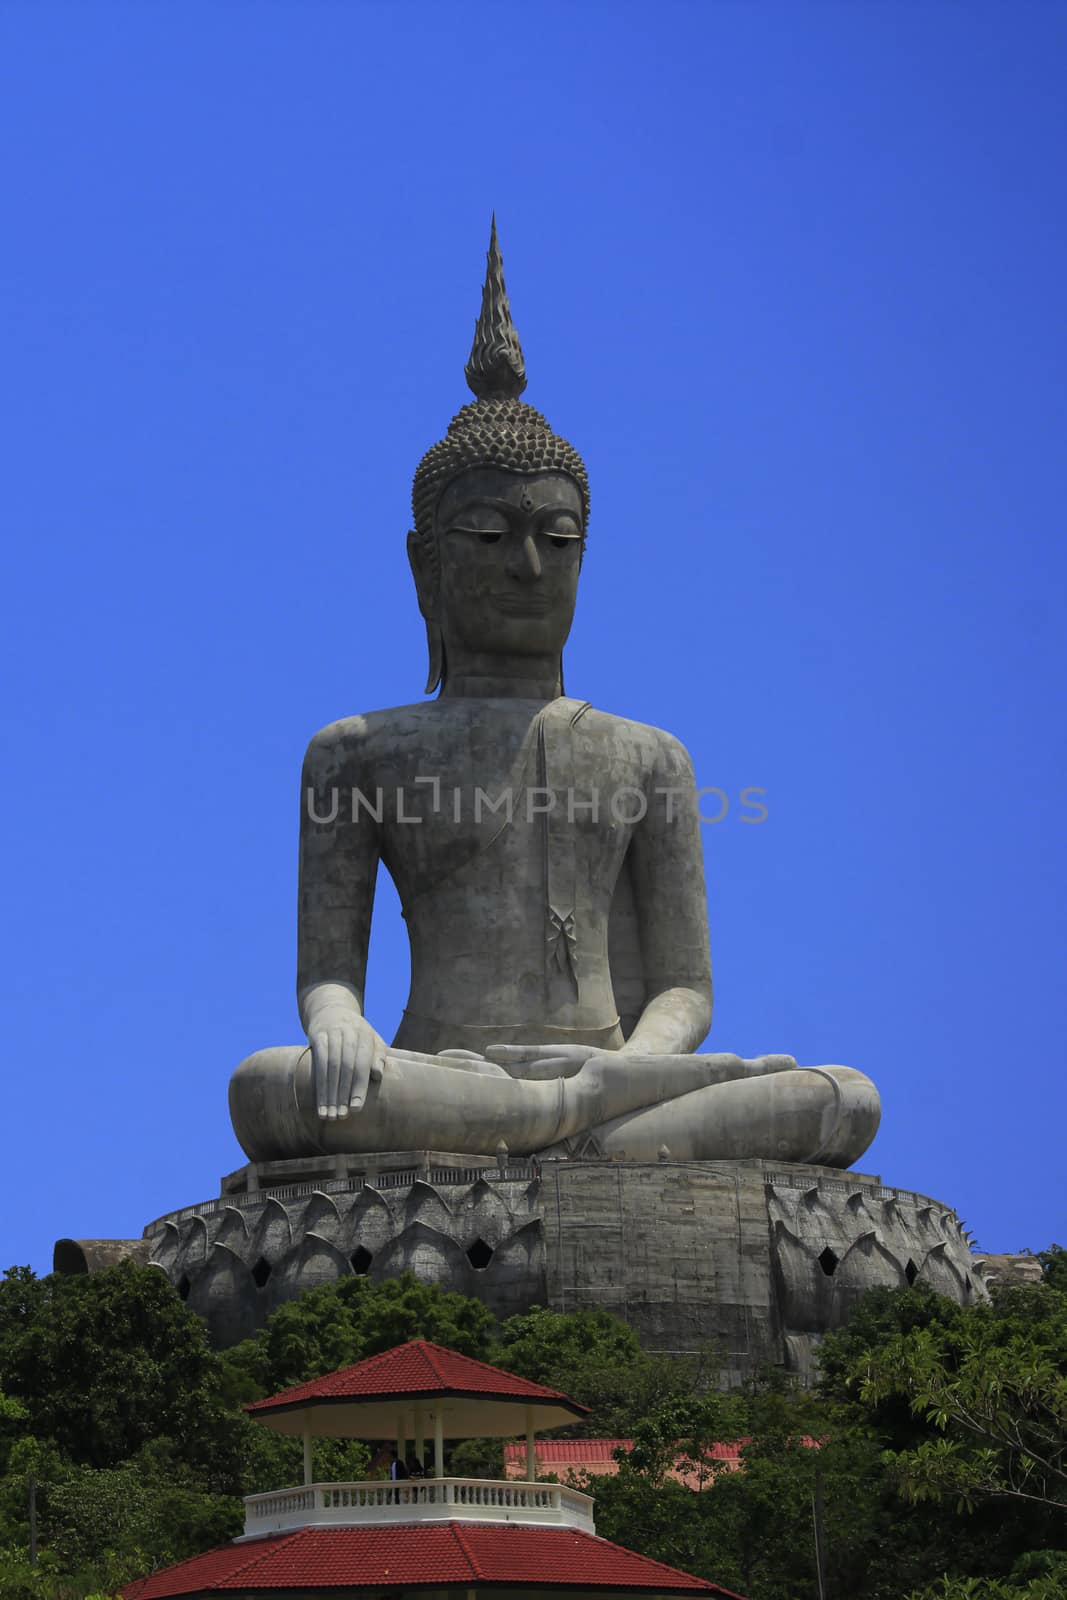 Large Buddha statue on a wide concrete base